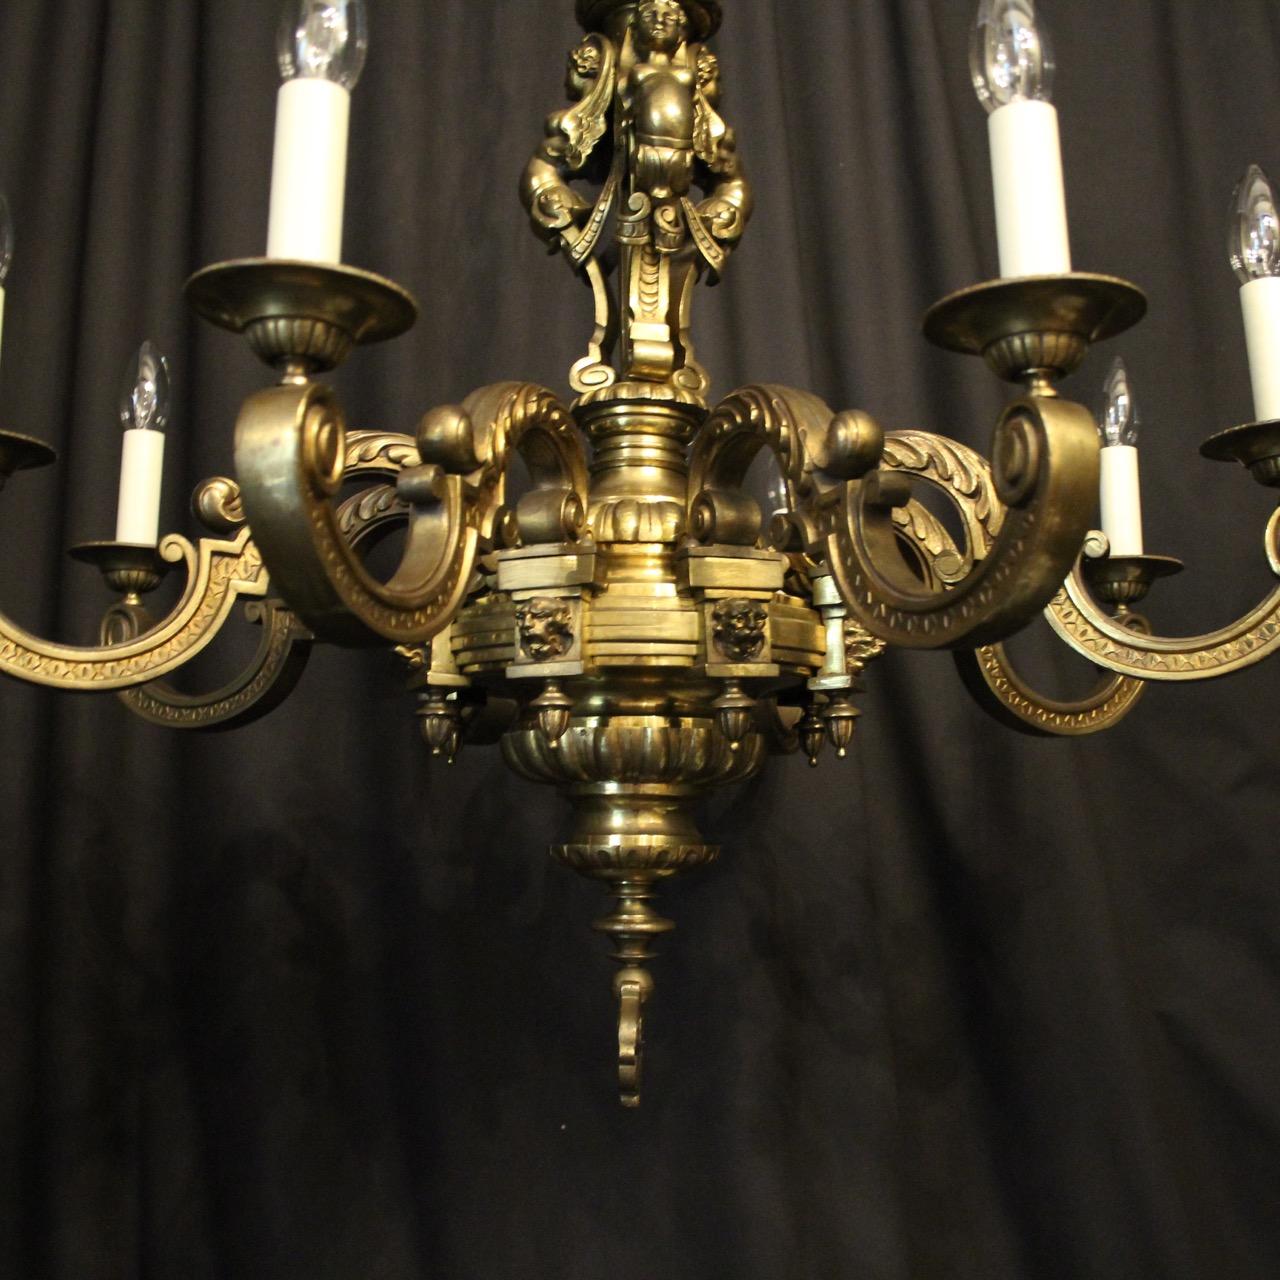 A French gilded bronze eight-light antique Mazarin chandelier, the decoratively clad acanthus leaf square gauge scrolling arms with circular bobeches drip pans, issuing from an ornate triple female supporting caryatids central column, lion mask